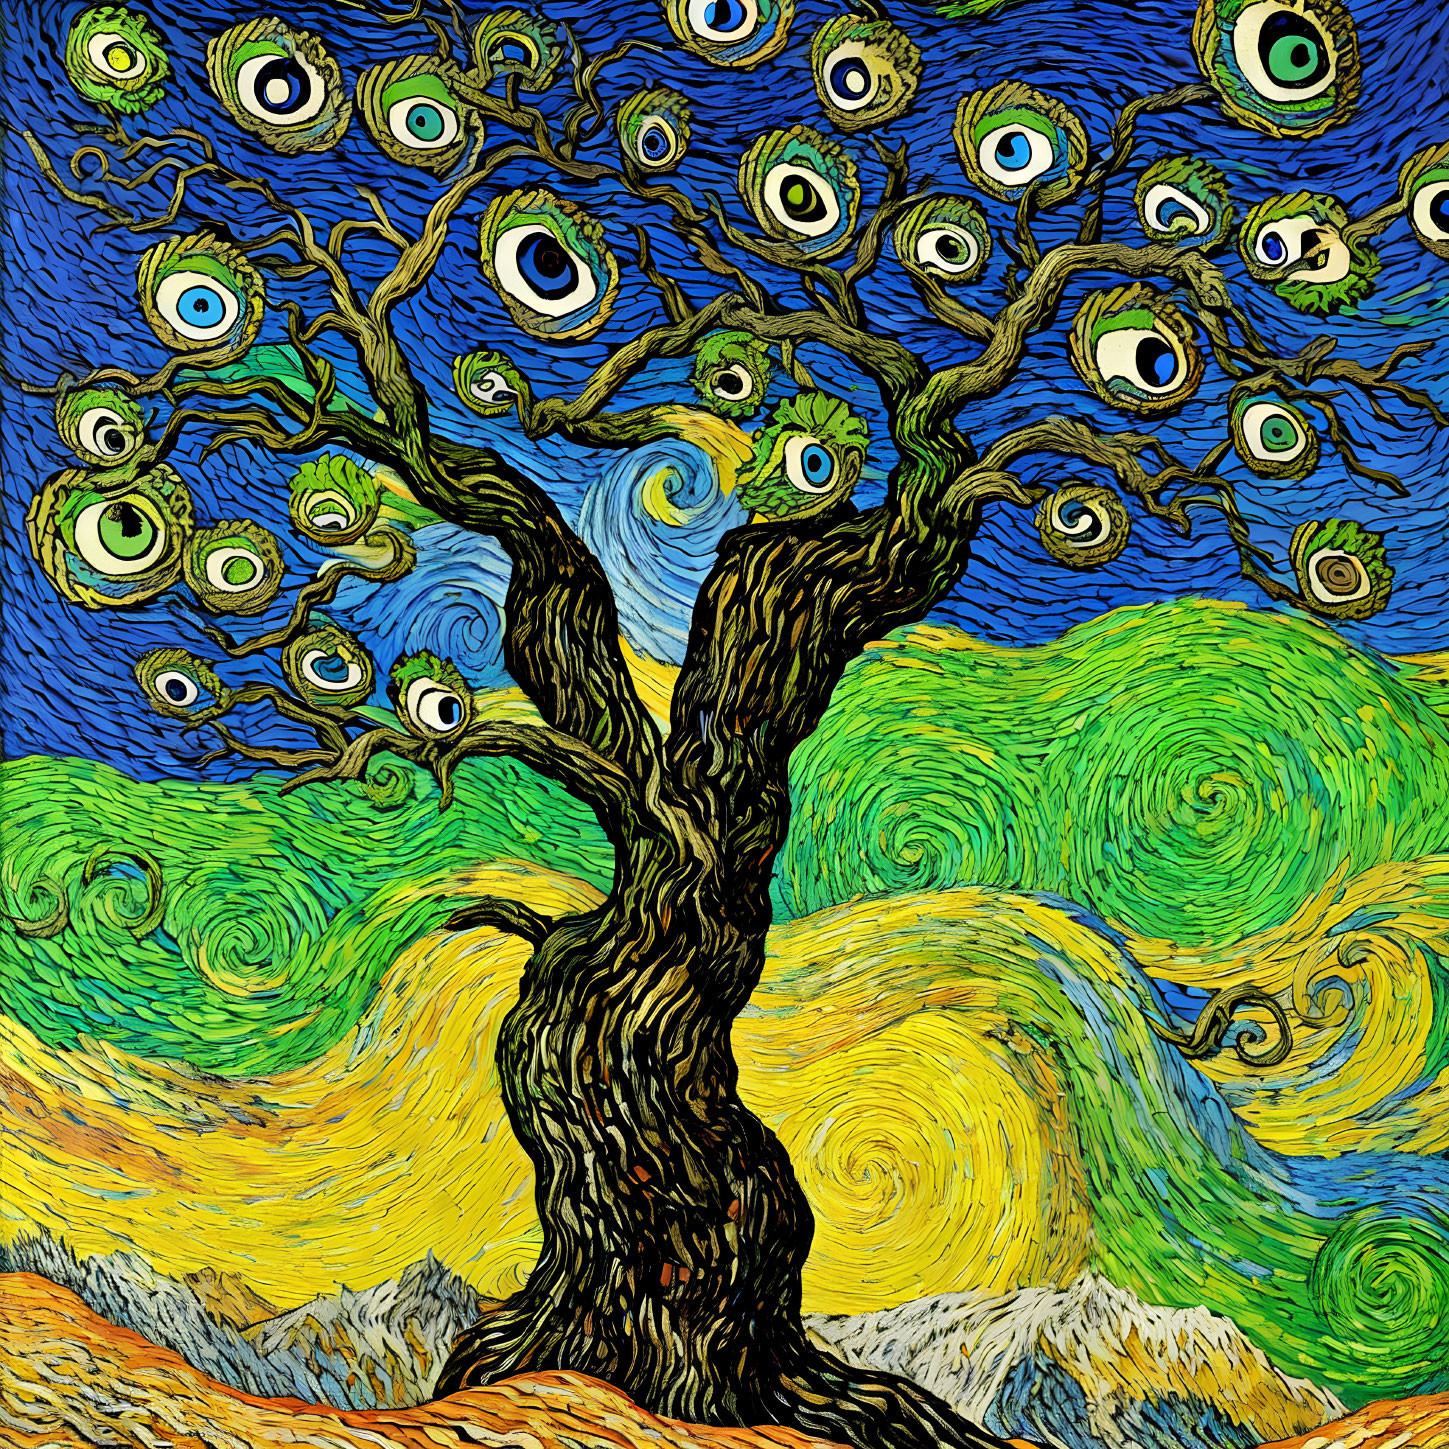 Surreal post-impressionist illustration of gnarled tree with eyes in starry sky